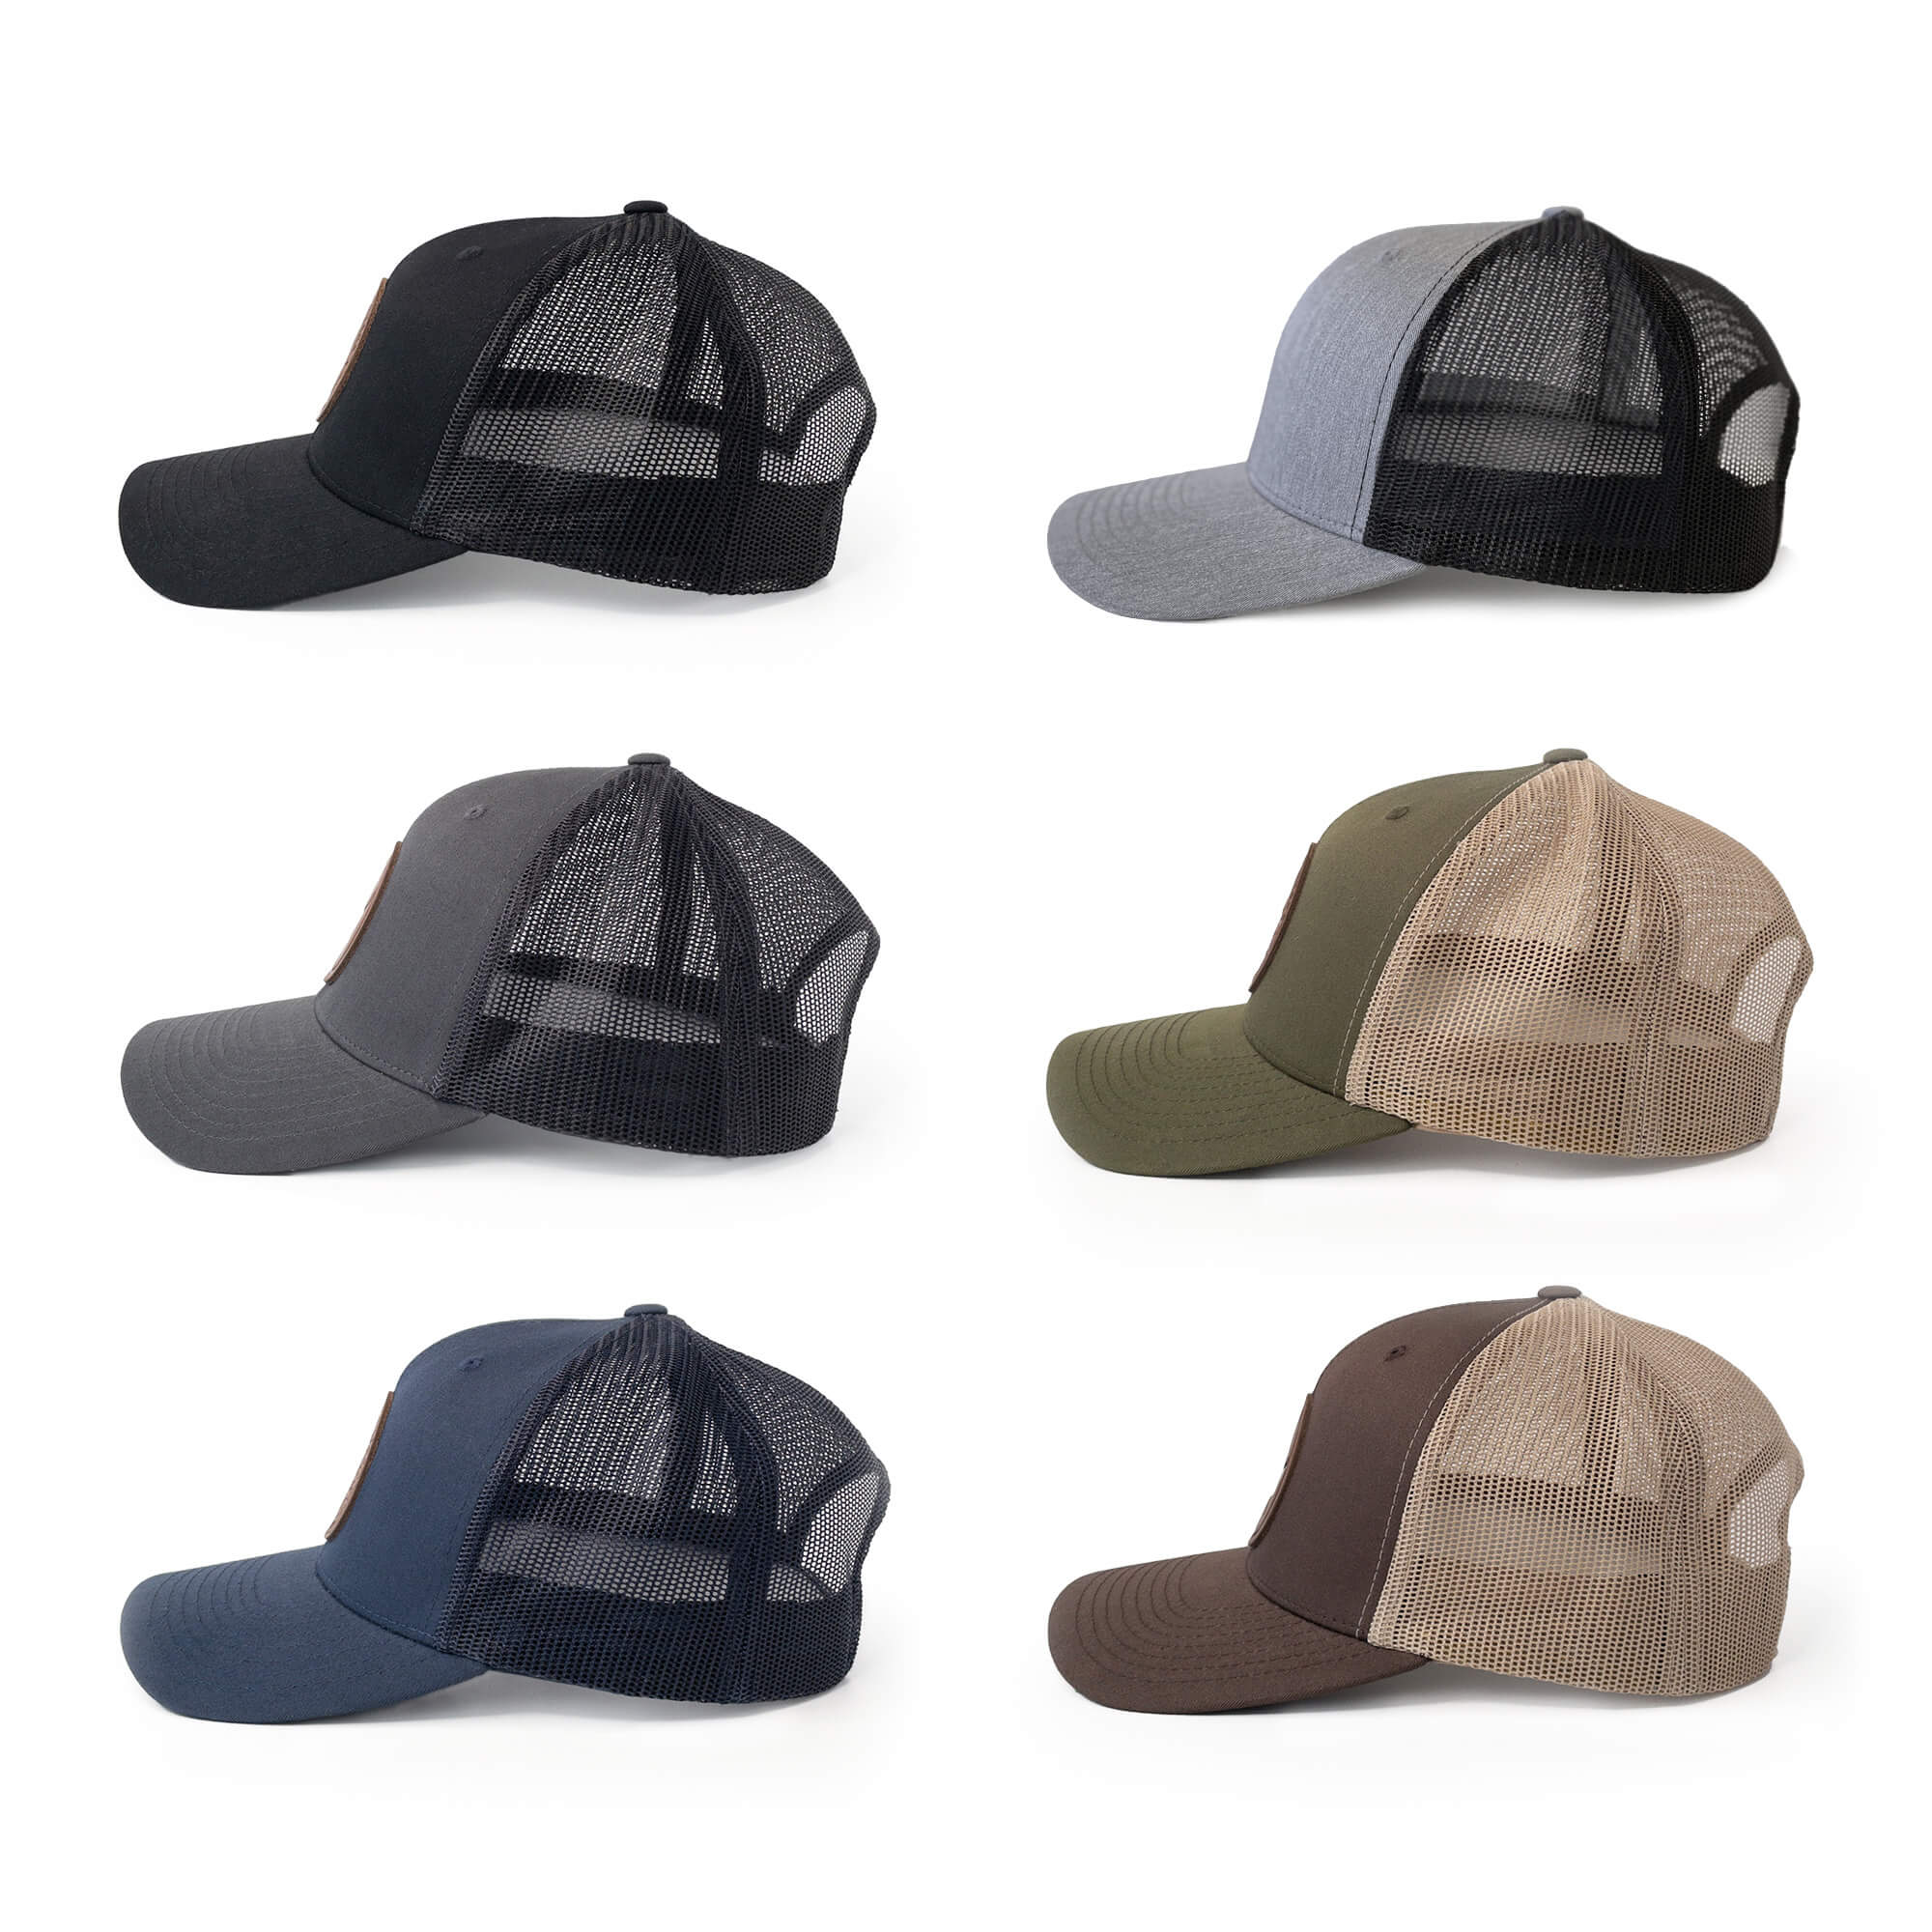 Leather patch trucker hats available in 6 colors | BLACK-003-012, CHARC-003-012, NAVY-003-012, HGREY-003-012, MOSS-003-012, BROWN-003-012